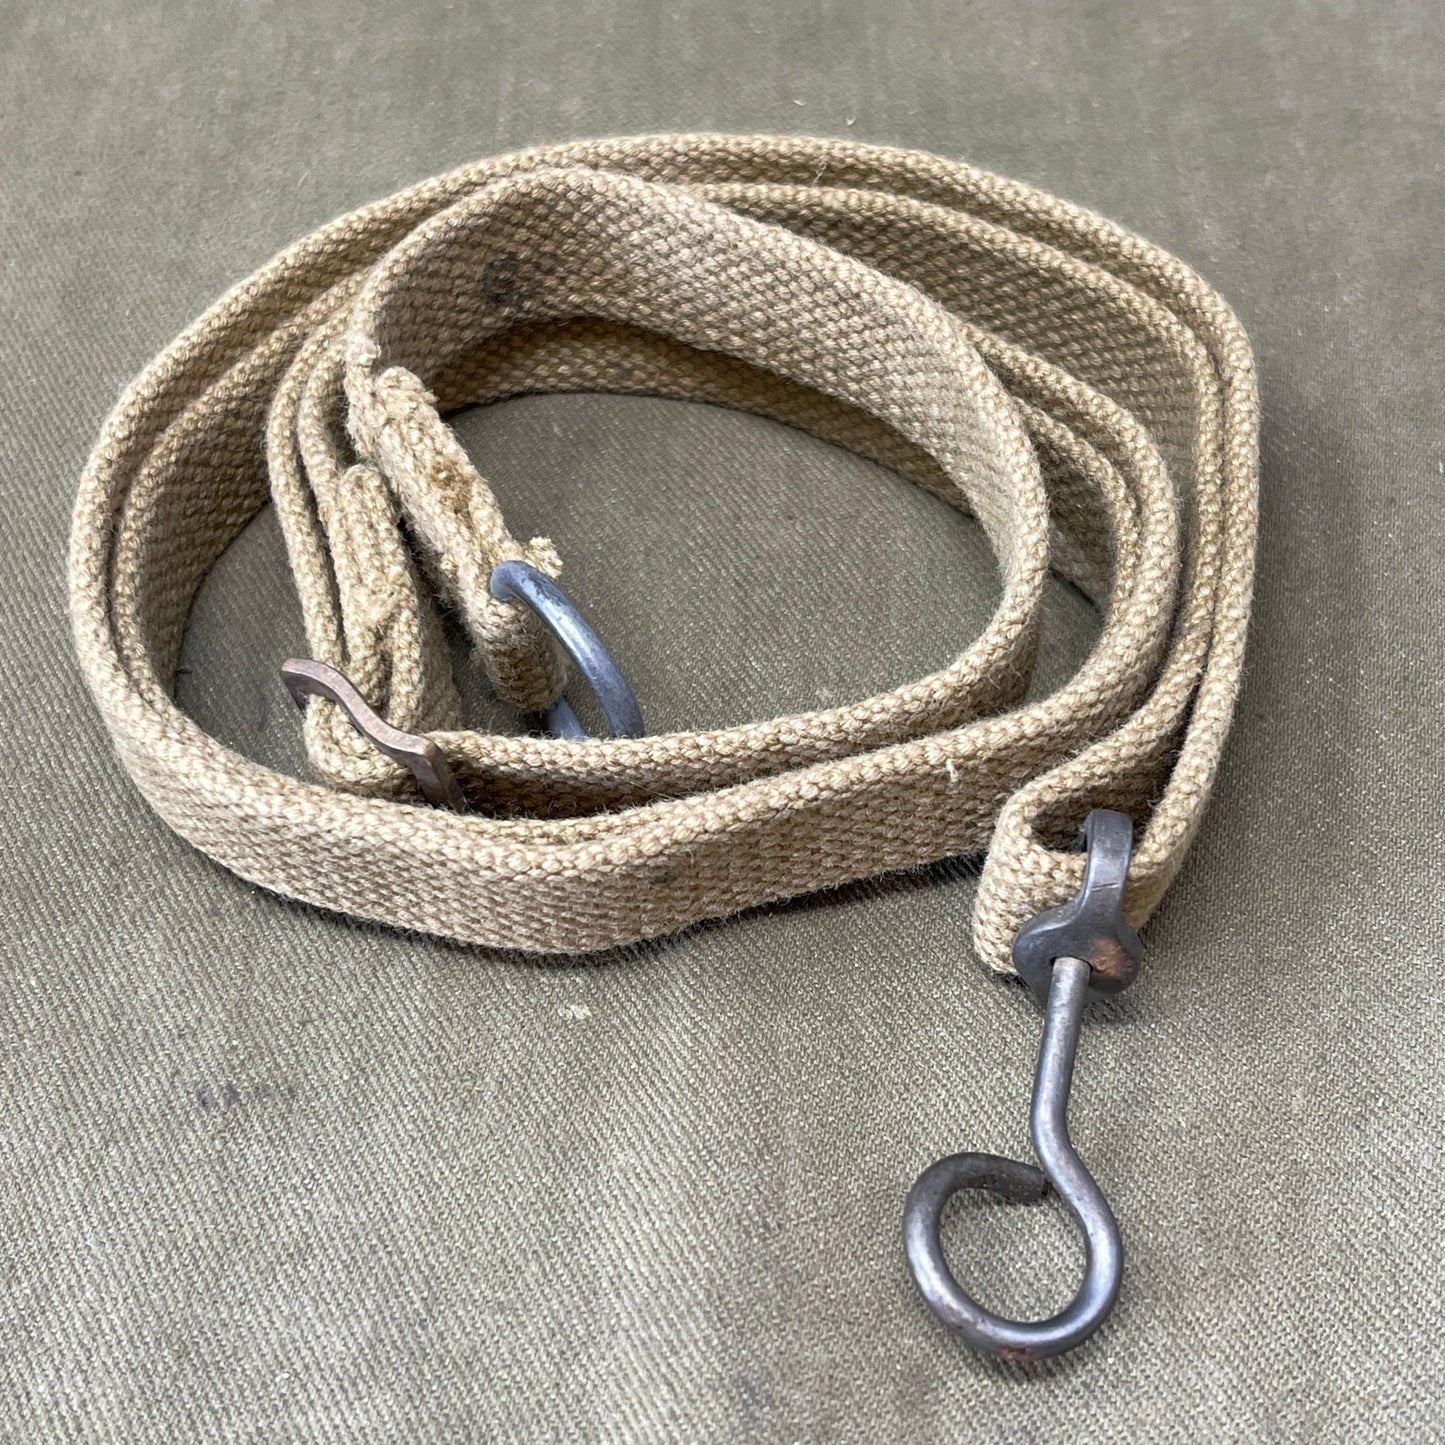 "Authentic British Army WW2 Sten Gun Sling for collectors and reenactors. Durable, adjustable, and historically accurate, perfect for adding a touch of authenticity to your WW2 collection."